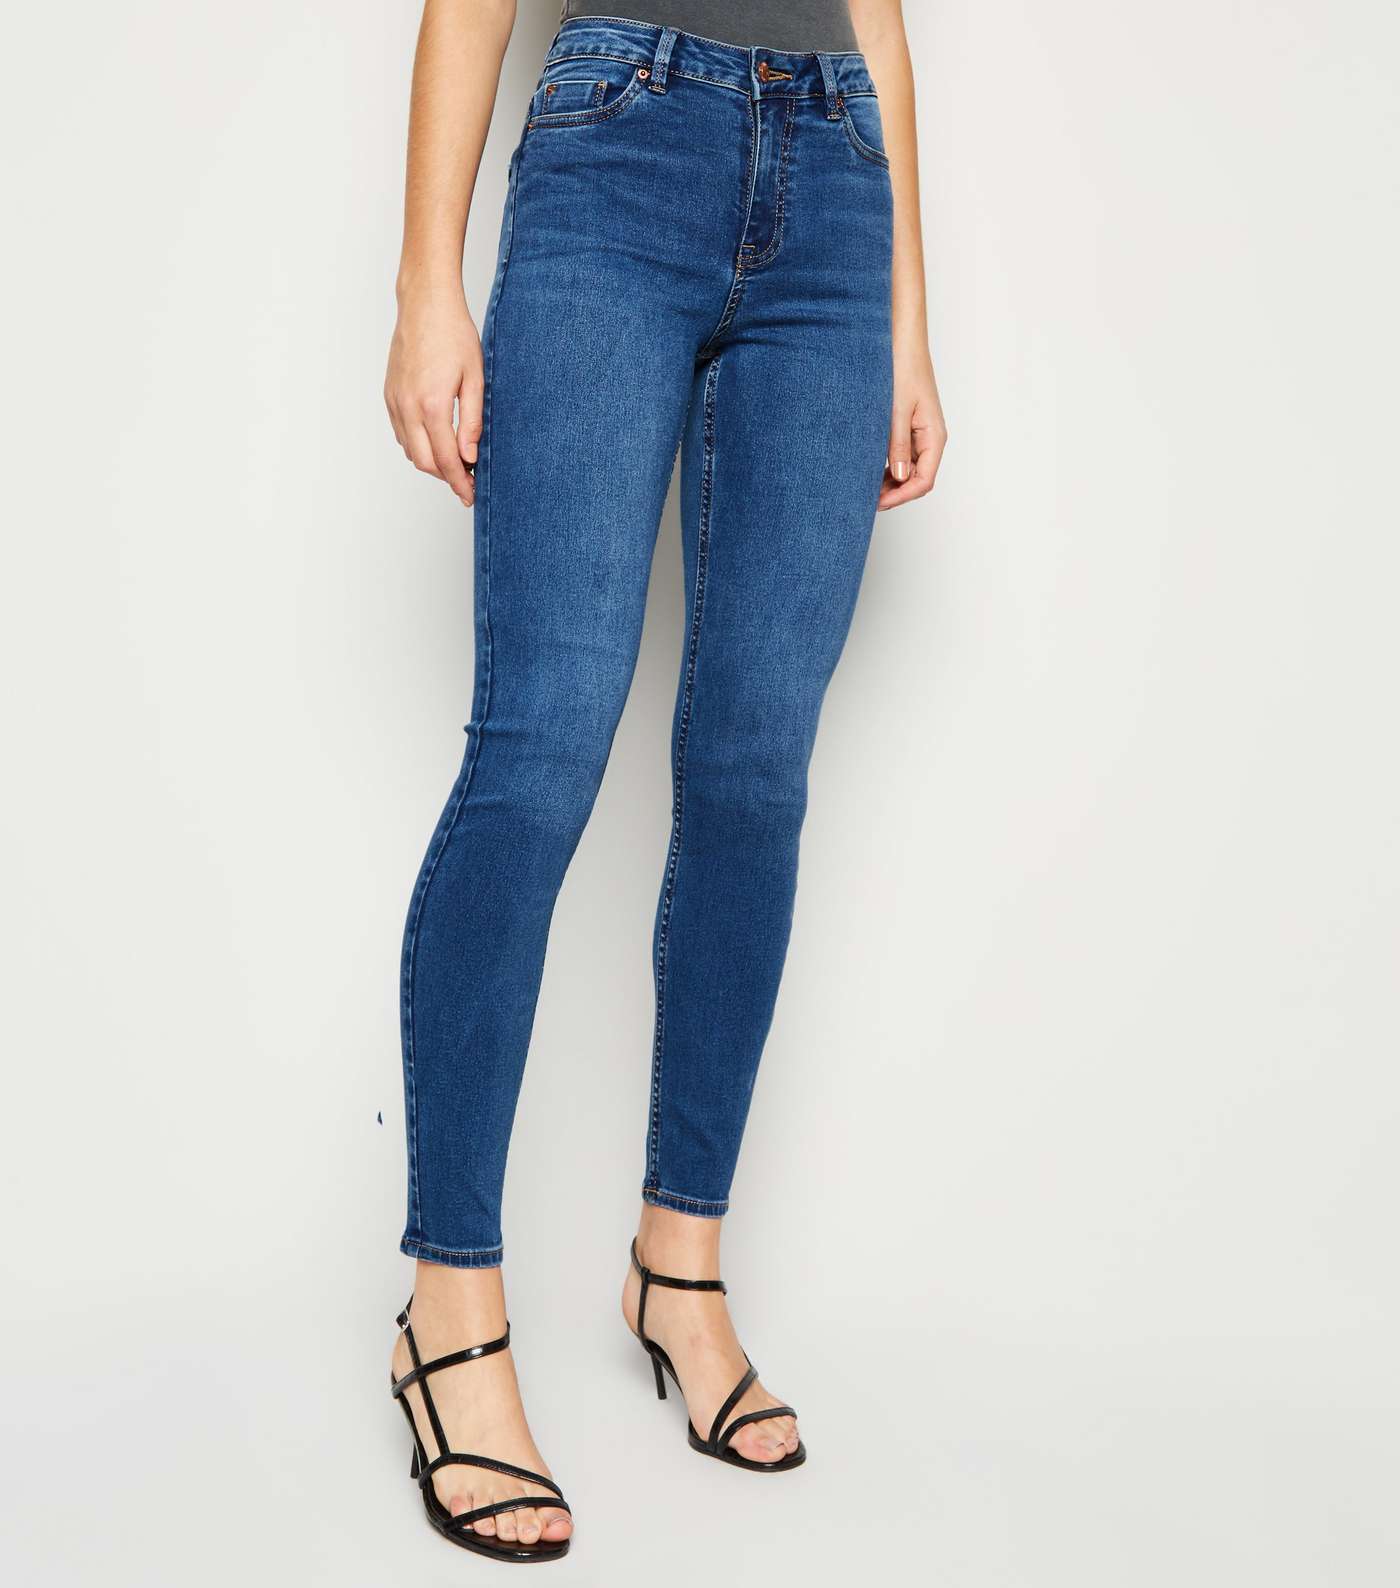 Bright Blue Mid Rise India Super Skinny Jeans Image 2